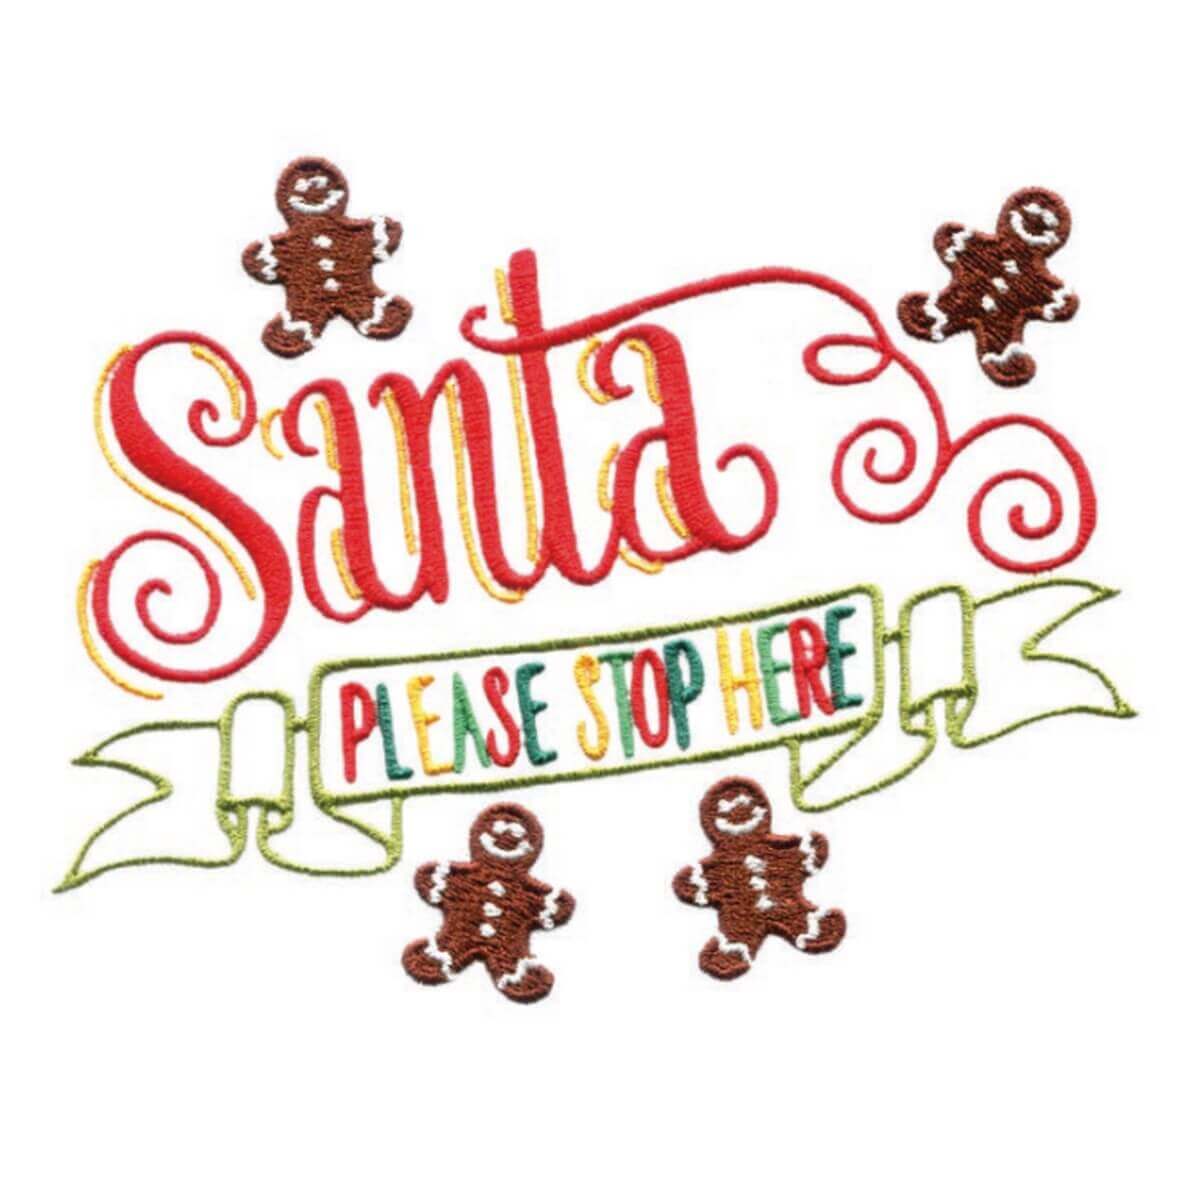 Stickdesign Santa Sayings Collection (Download)